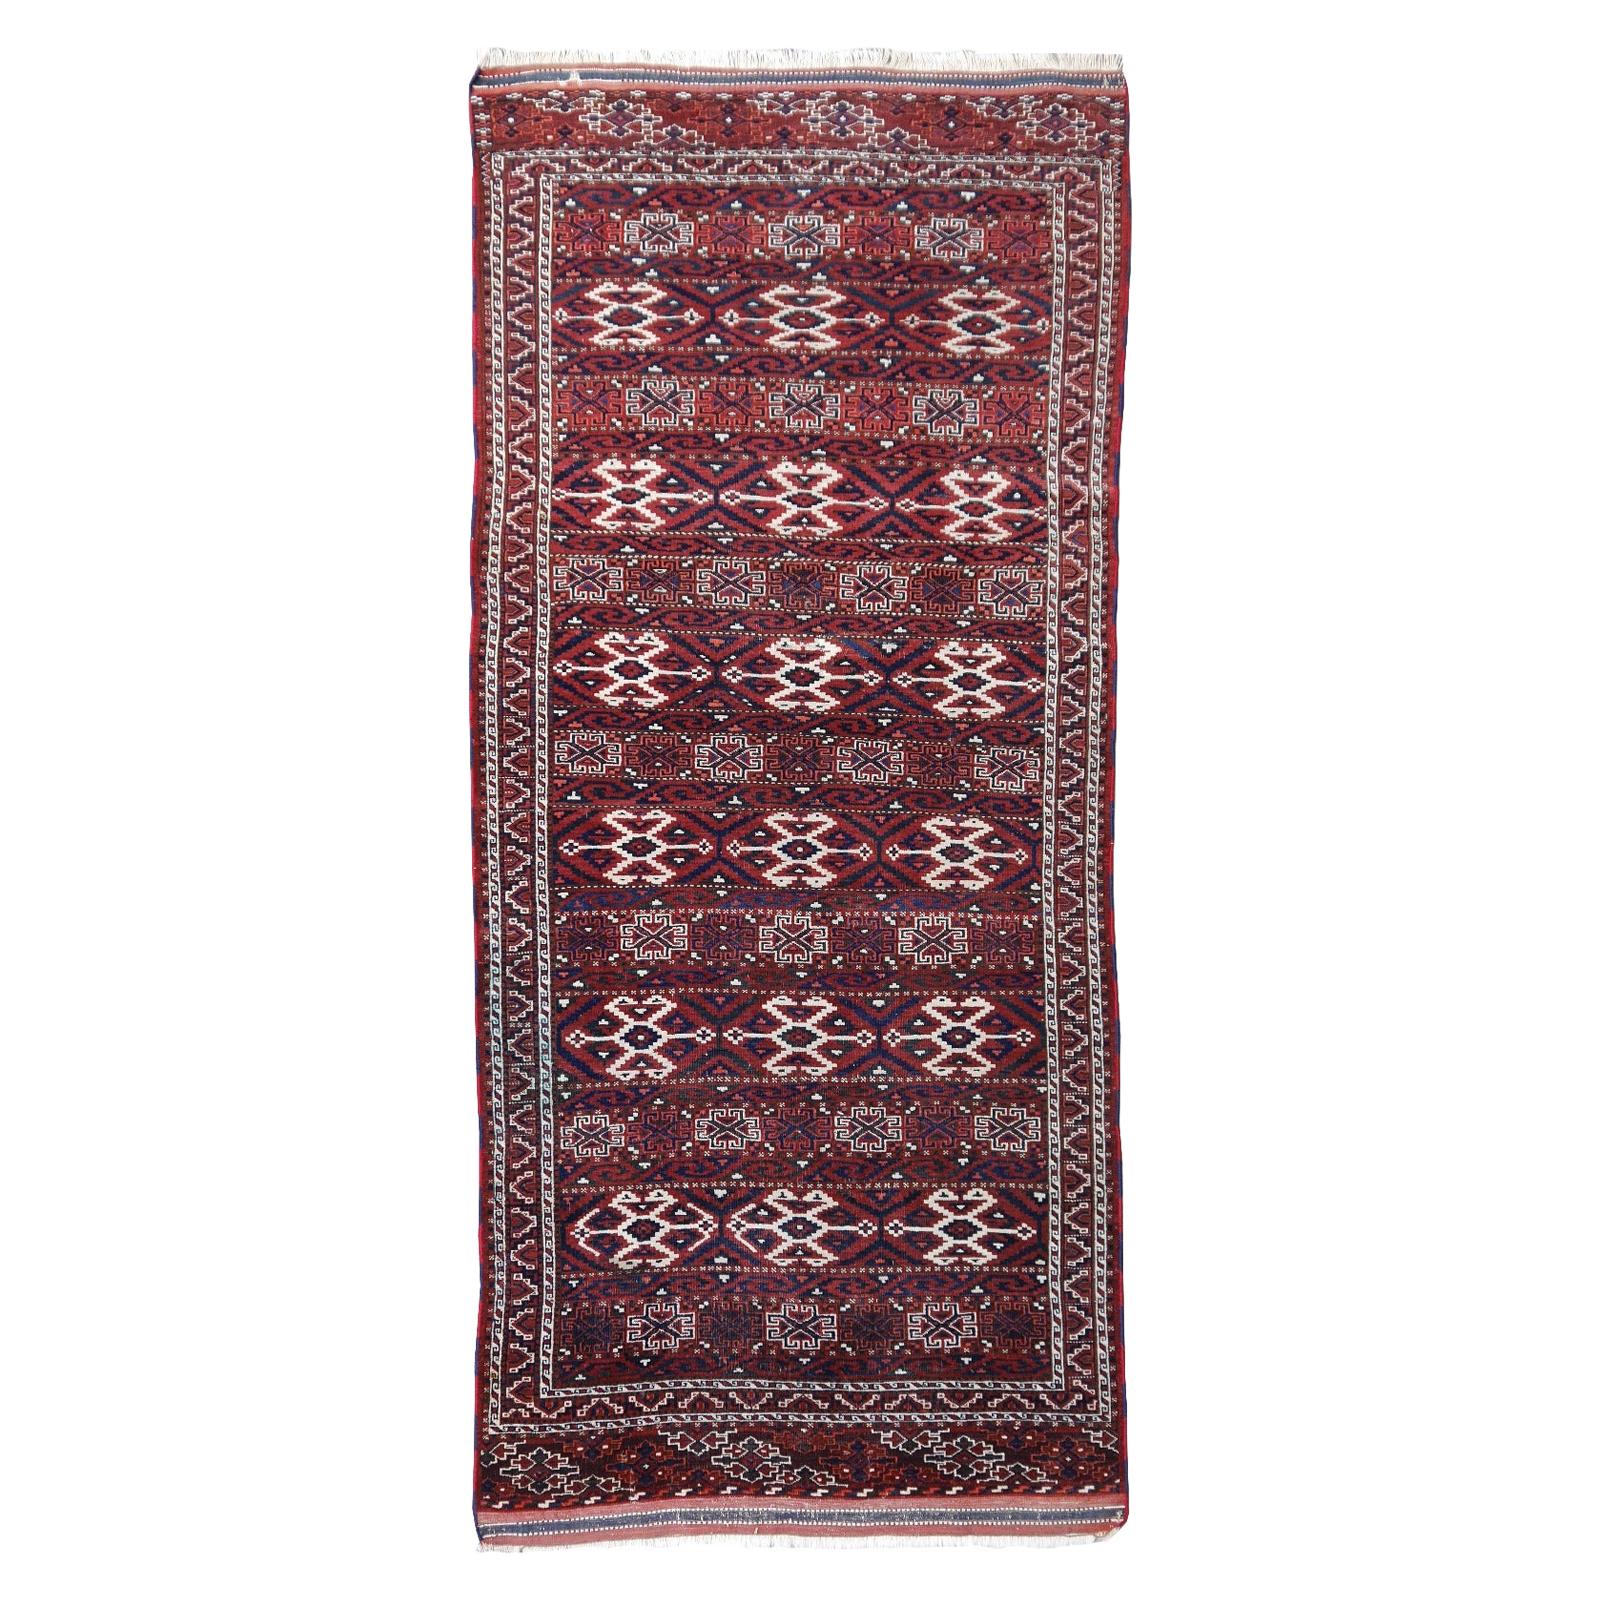 Yomud Tribeal Turkmen Turkoman Antique Rug with Ram Motive Hand Knotted Carpet